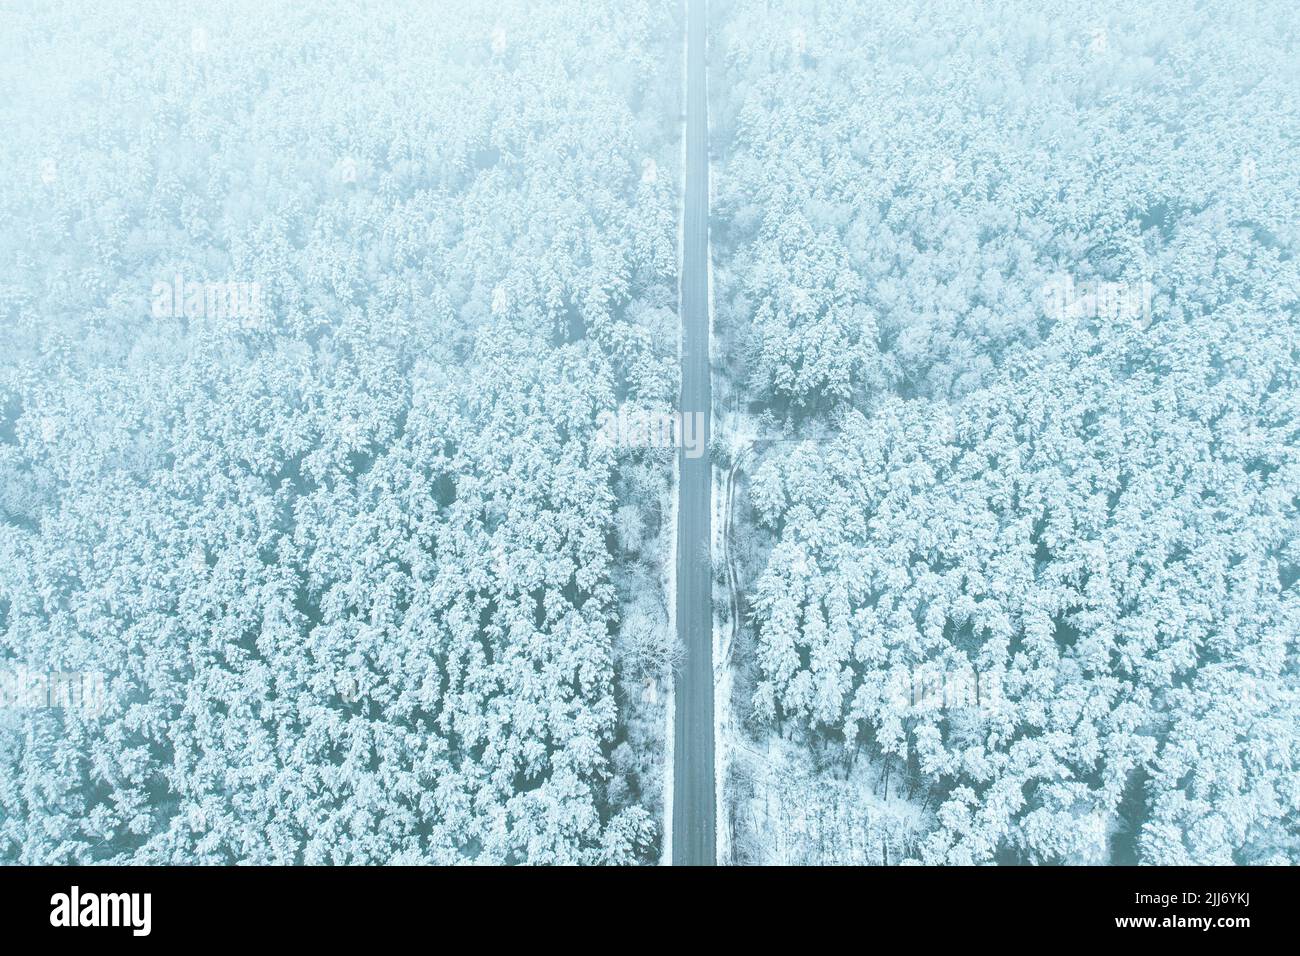 Aerial view of highway road through snow forest landscape in winter. Top view of highway motorway freeway from high attitude. Trip and travel concept Stock Photo